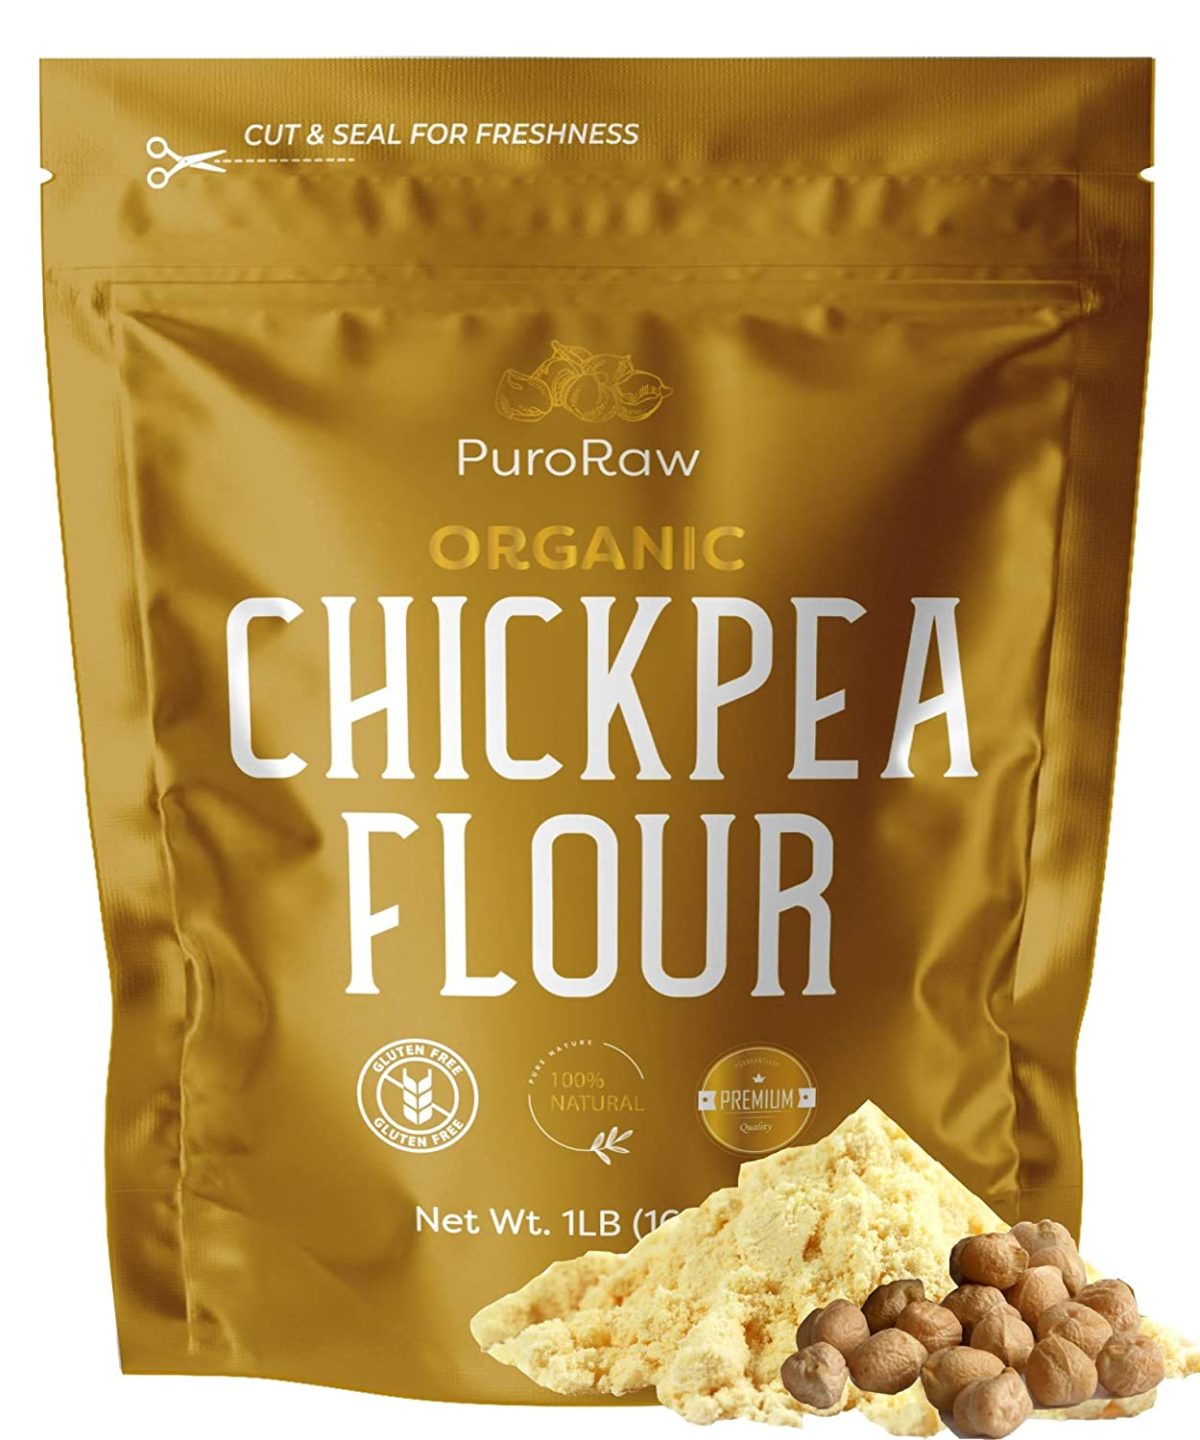 Chickpea flour as a good substitute for all-purpose